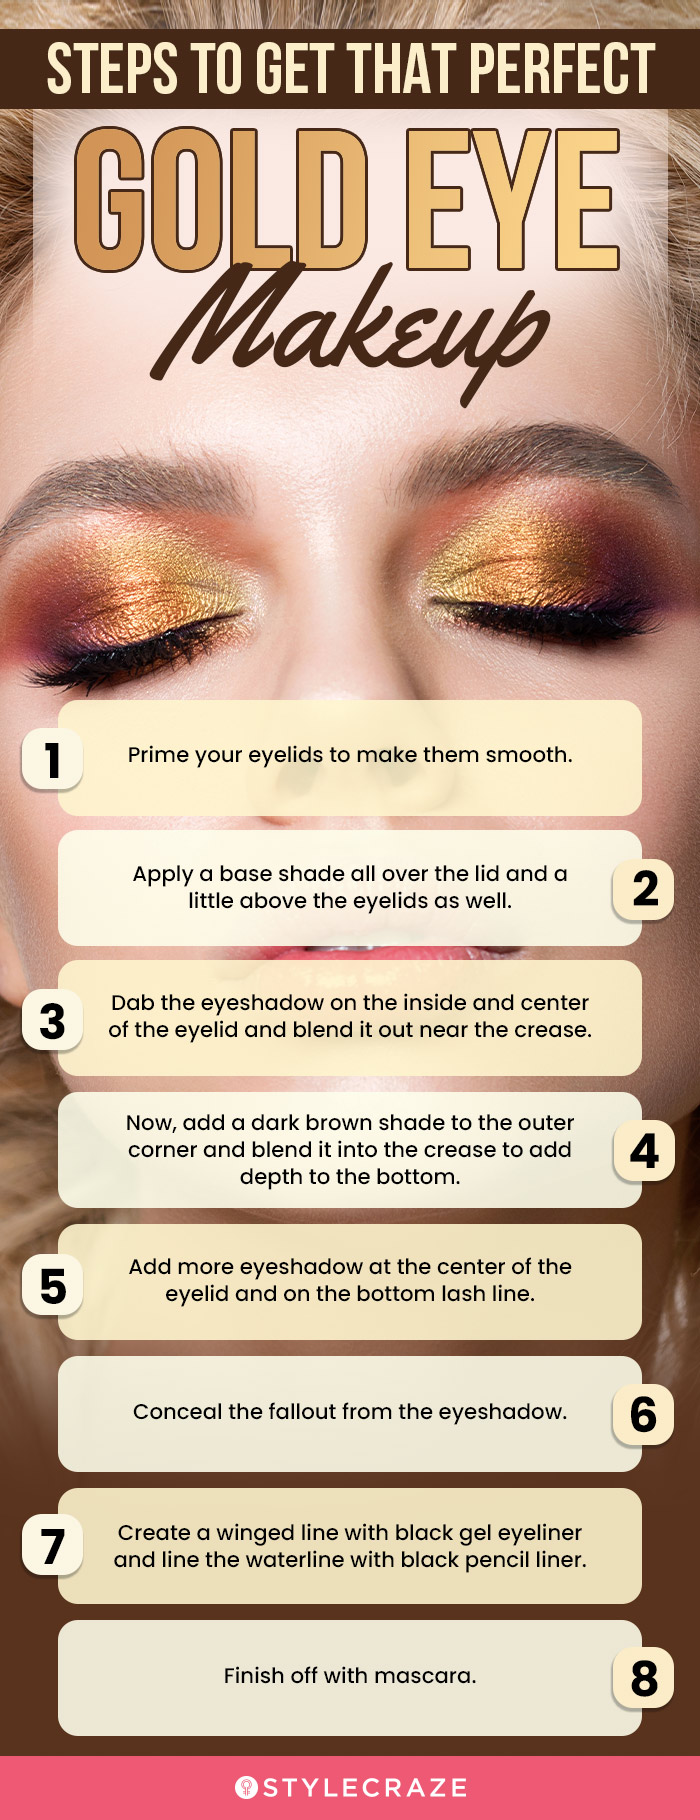 steps to get that perfect gold eye makeup (infographic)